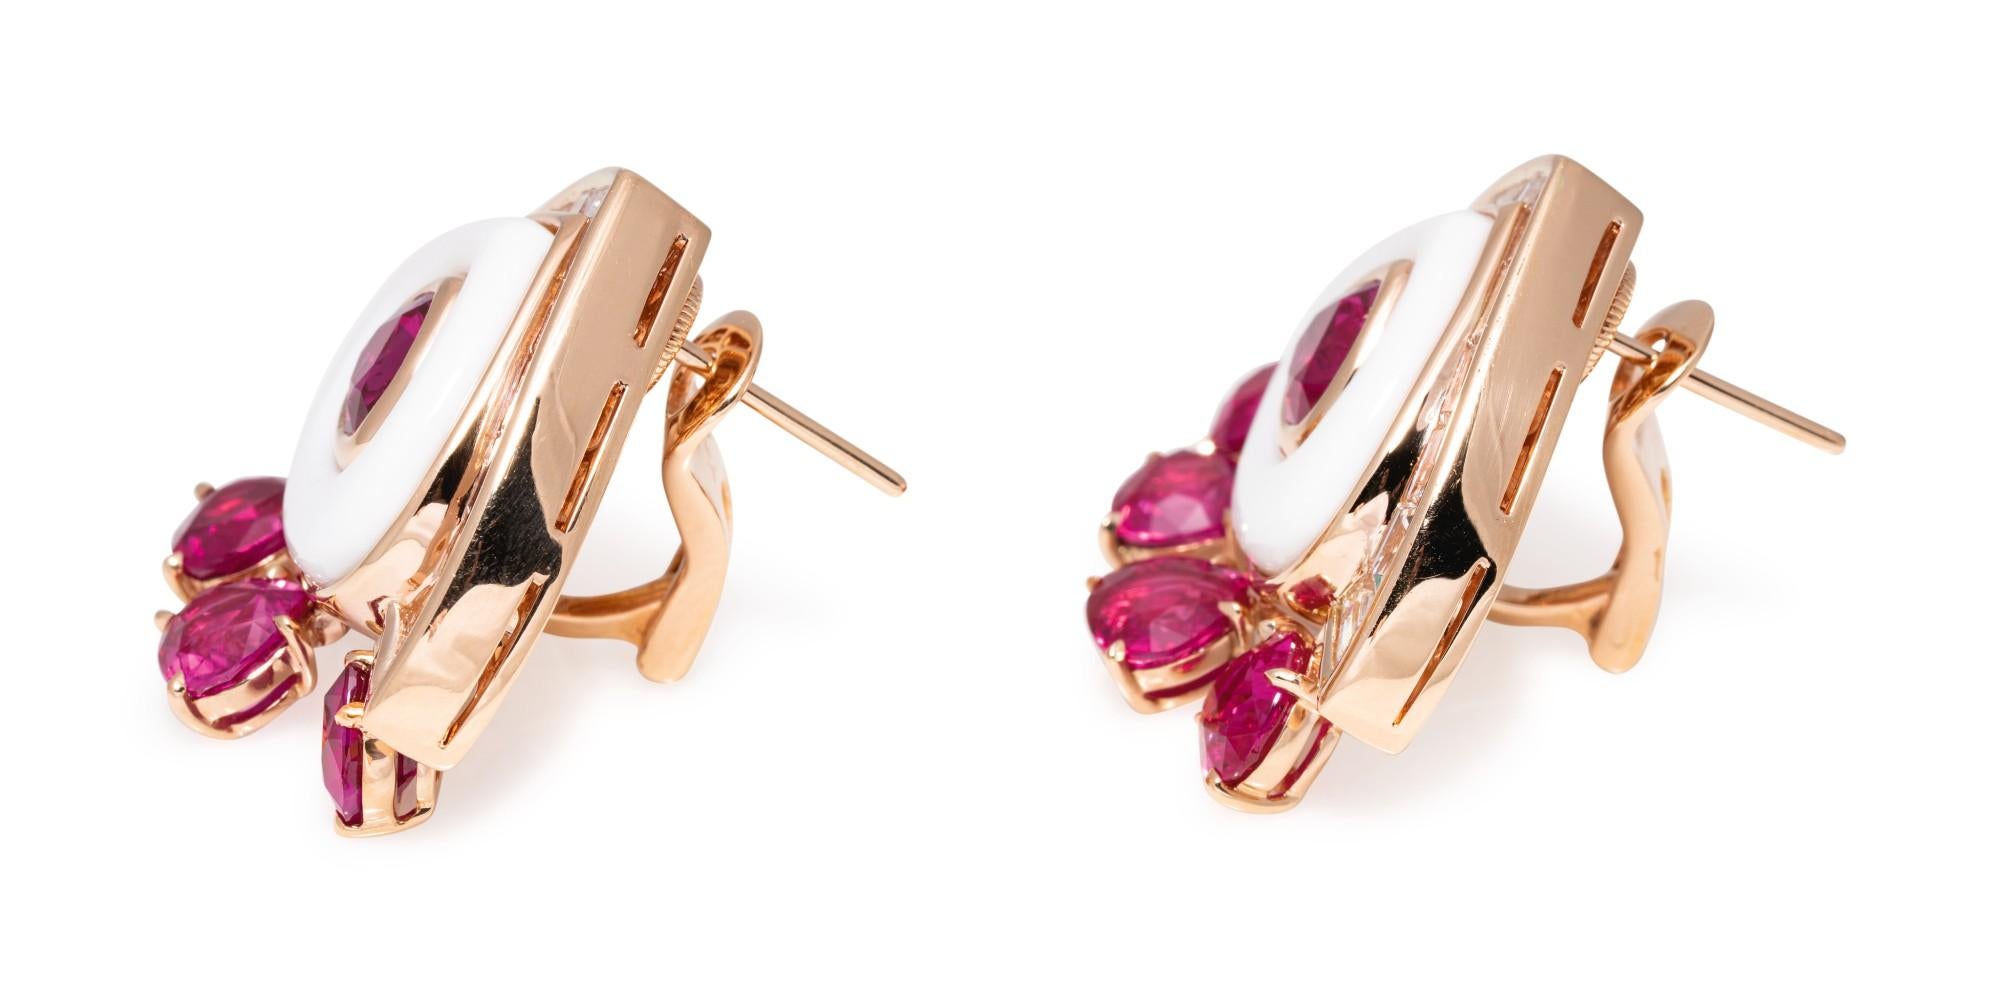 Chic Marina B earclips centering pear-shaped rubies within polished cocholong (white opal) frames, accented by 3.70 carats of baguette diamonds, further suspending fringes of pear-shaped rubies totaling 10.15 carats. 18 karat pink gold, 1 inch long,